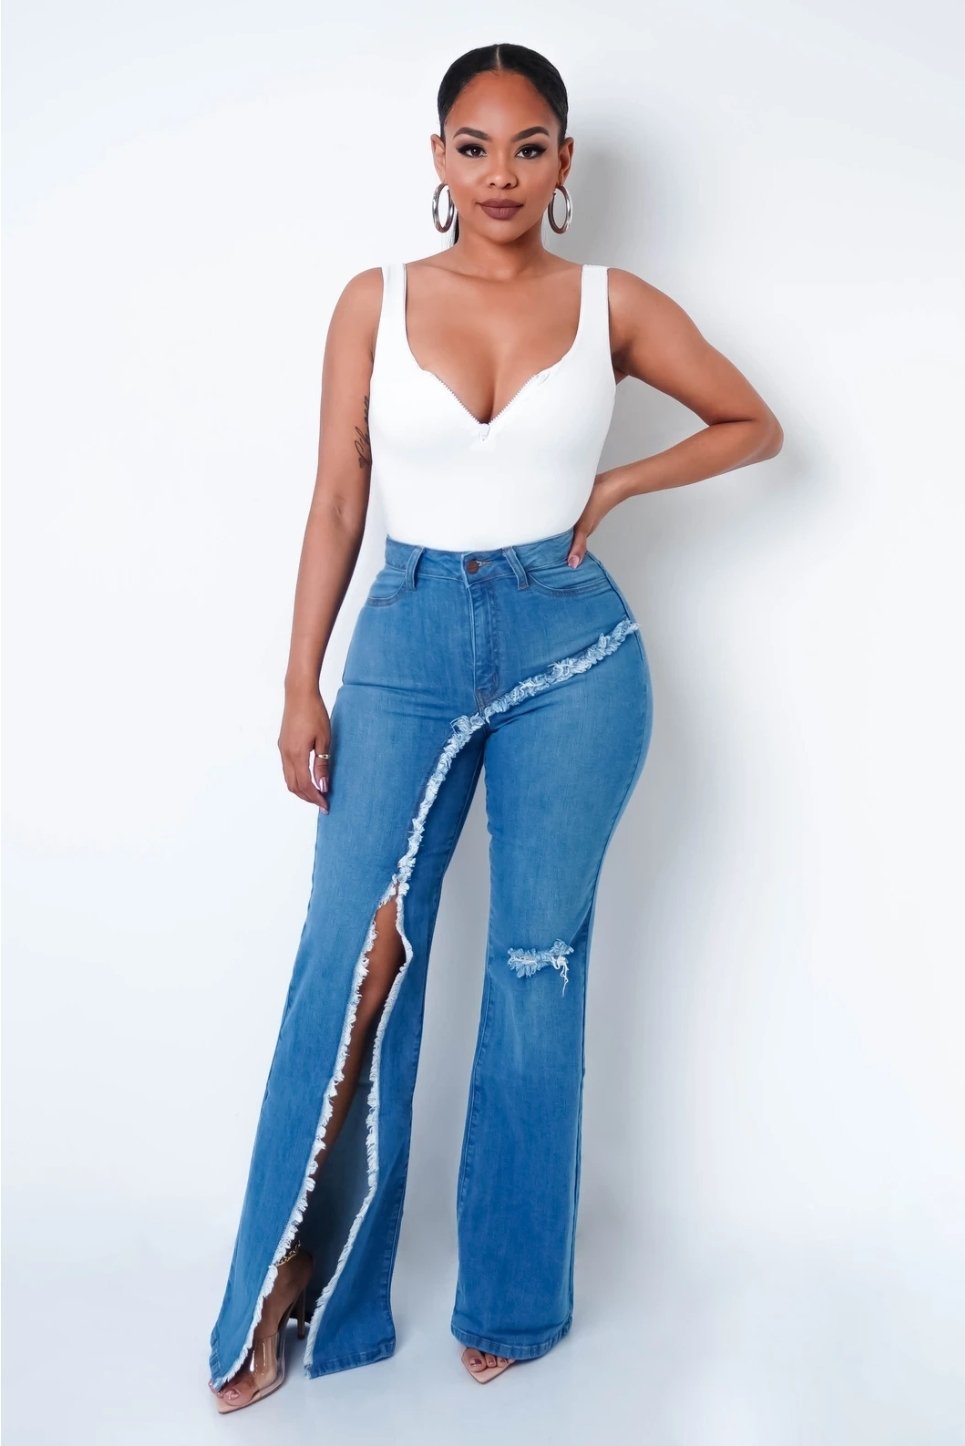 High Waist Ripped Flare Jeans for Women - Trendy Distressed Denim Pants - - Women's Jeans - Carvan Mart